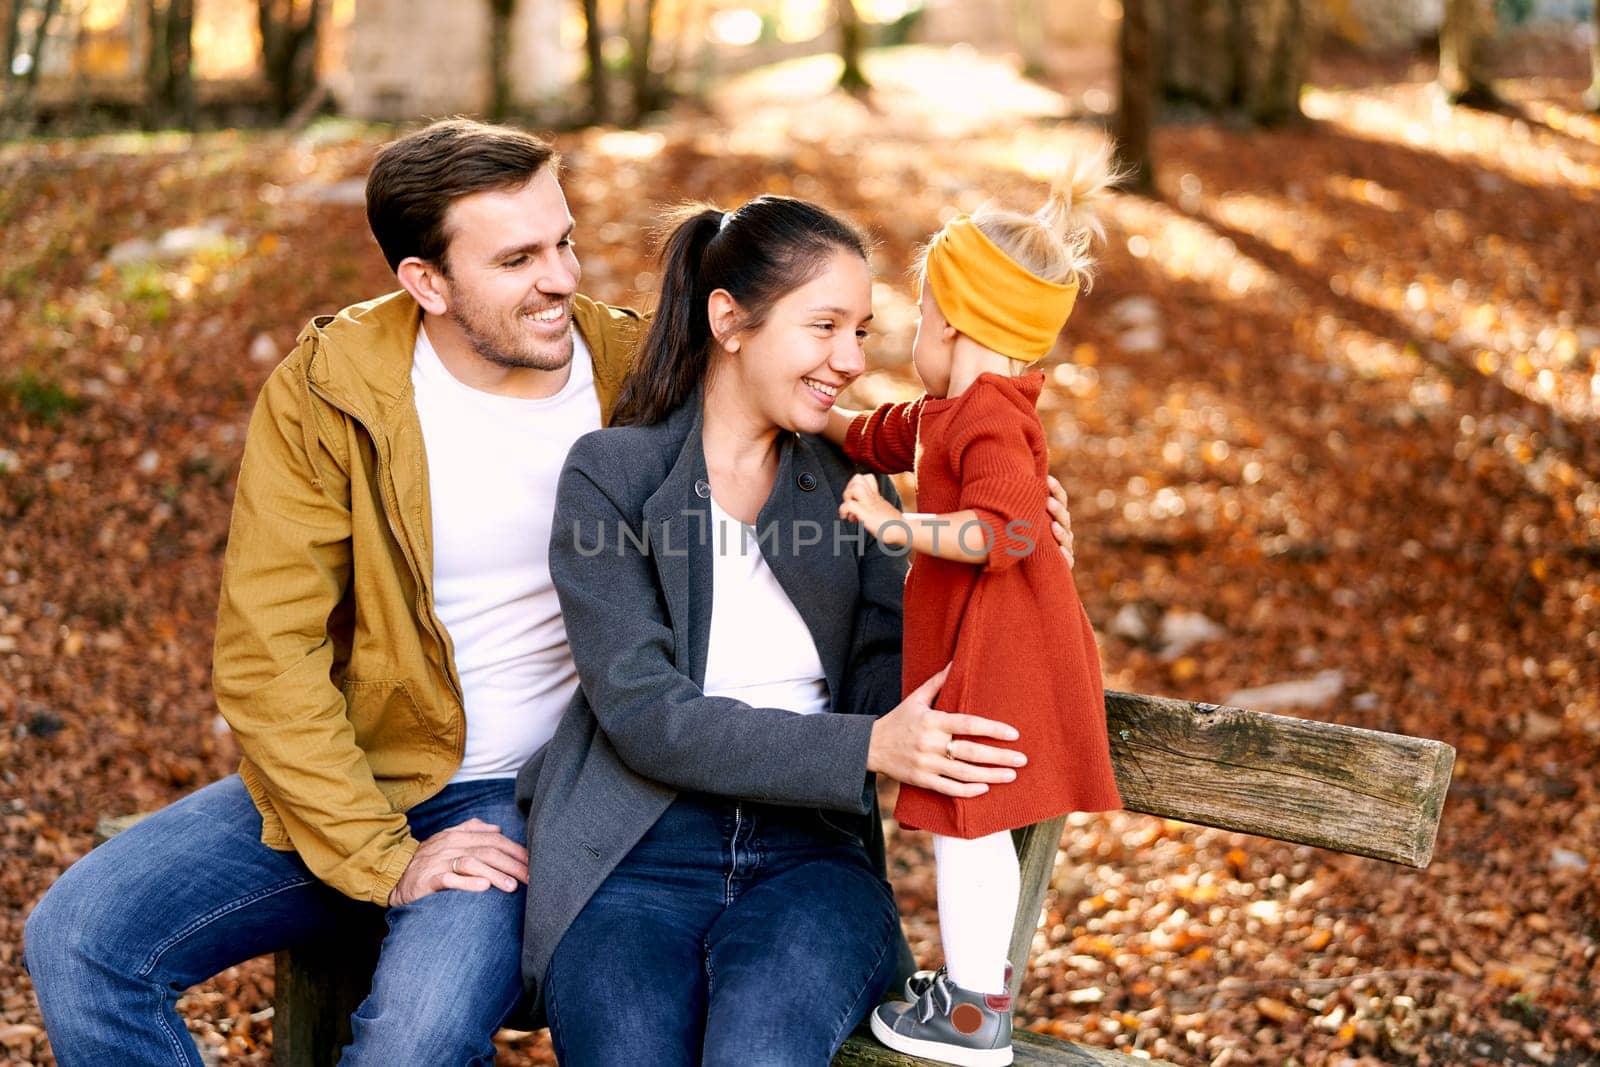 Little girl touches dad sitting with mom on bench in autumn forest by Nadtochiy